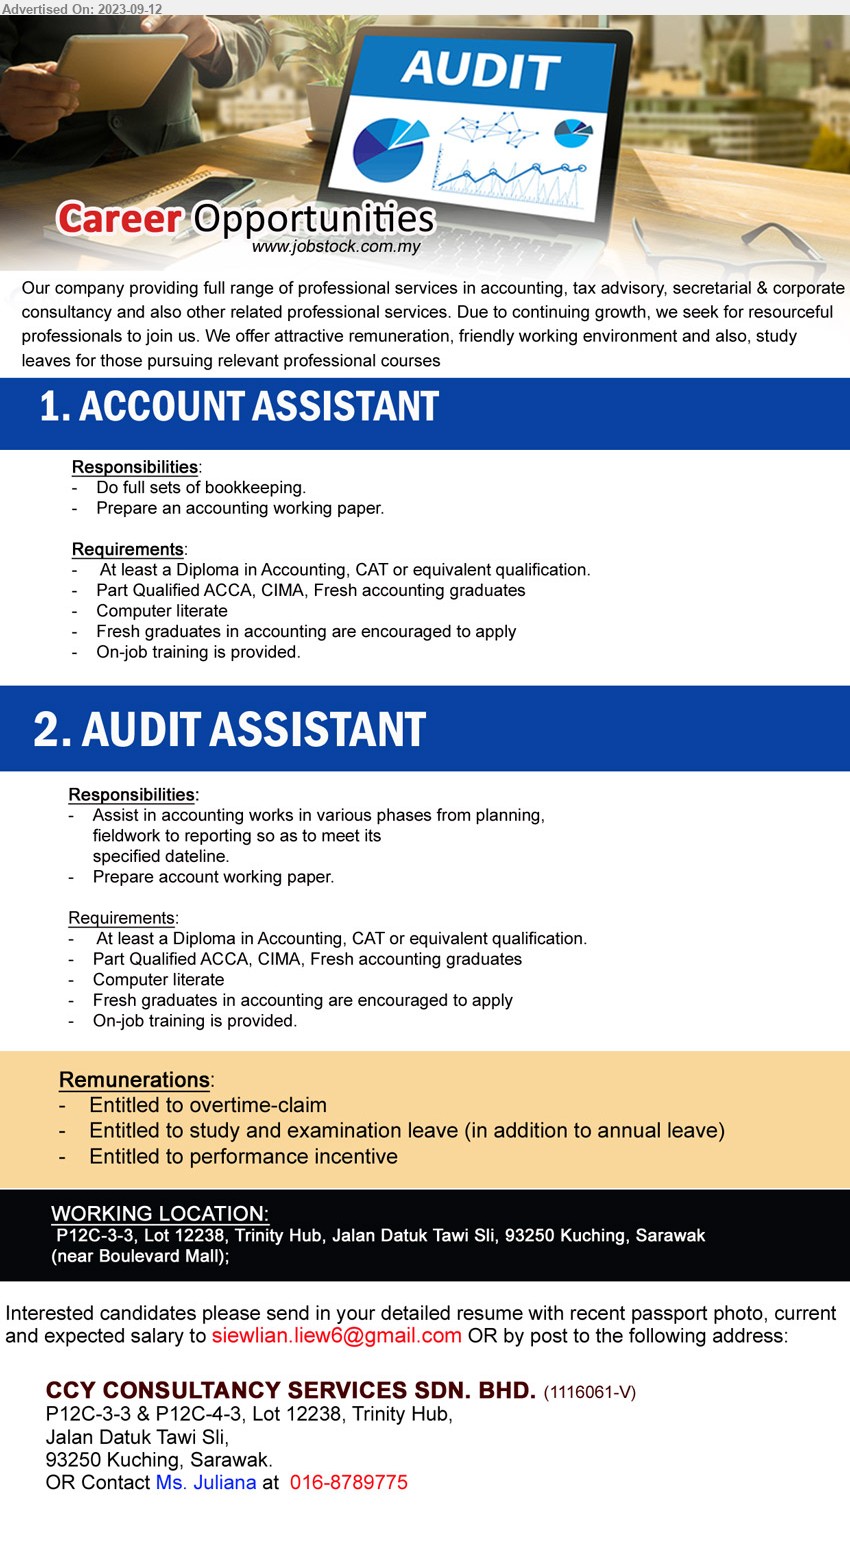 CCY CONSULTANCY SERVICES SDN BHD - 1. ACCOUNT ASSISTANT  (Kuching), Diploma in Accounting, CAT, Part Qualified ACCA, CIMA, Fresh accounting graduates,...
2. AUDIT ASSISTANT  (Kuching), Diploma in Accounting, CAT, Part Qualified ACCA, CIMA, Fresh accounting graduates,...
Contact Ms. Juliana at  016-8789775 / Email resume to ...